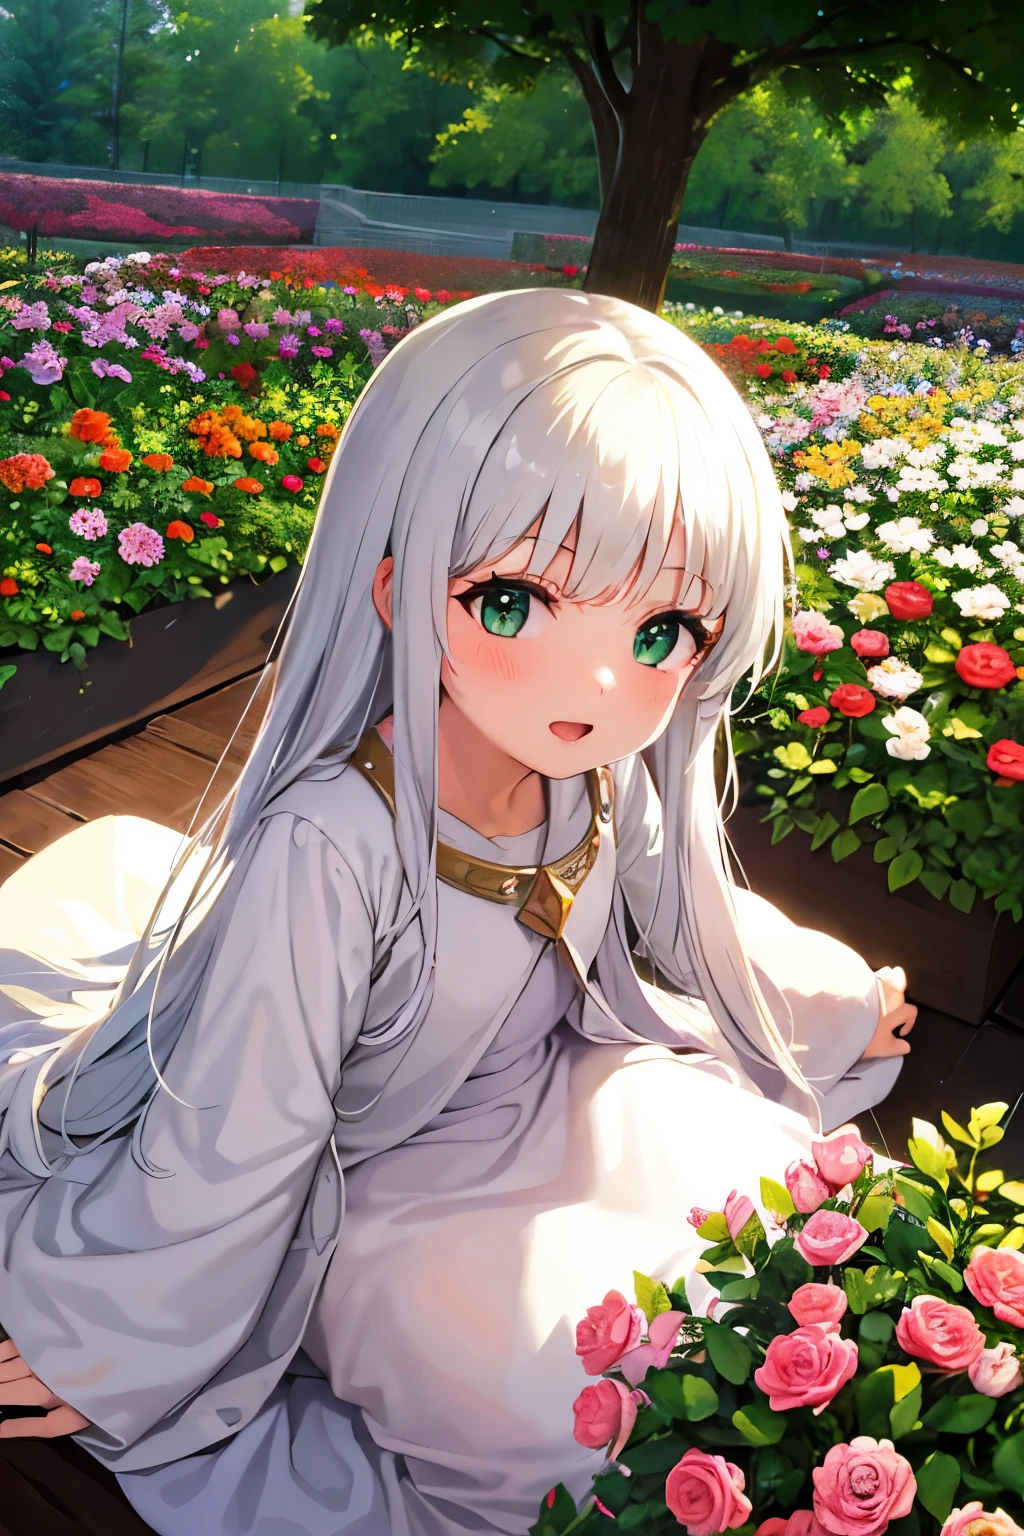 Long silver hair, green eyes, , only, white clothes, flowers in head, smile, beautiful thighs, open legs, garden